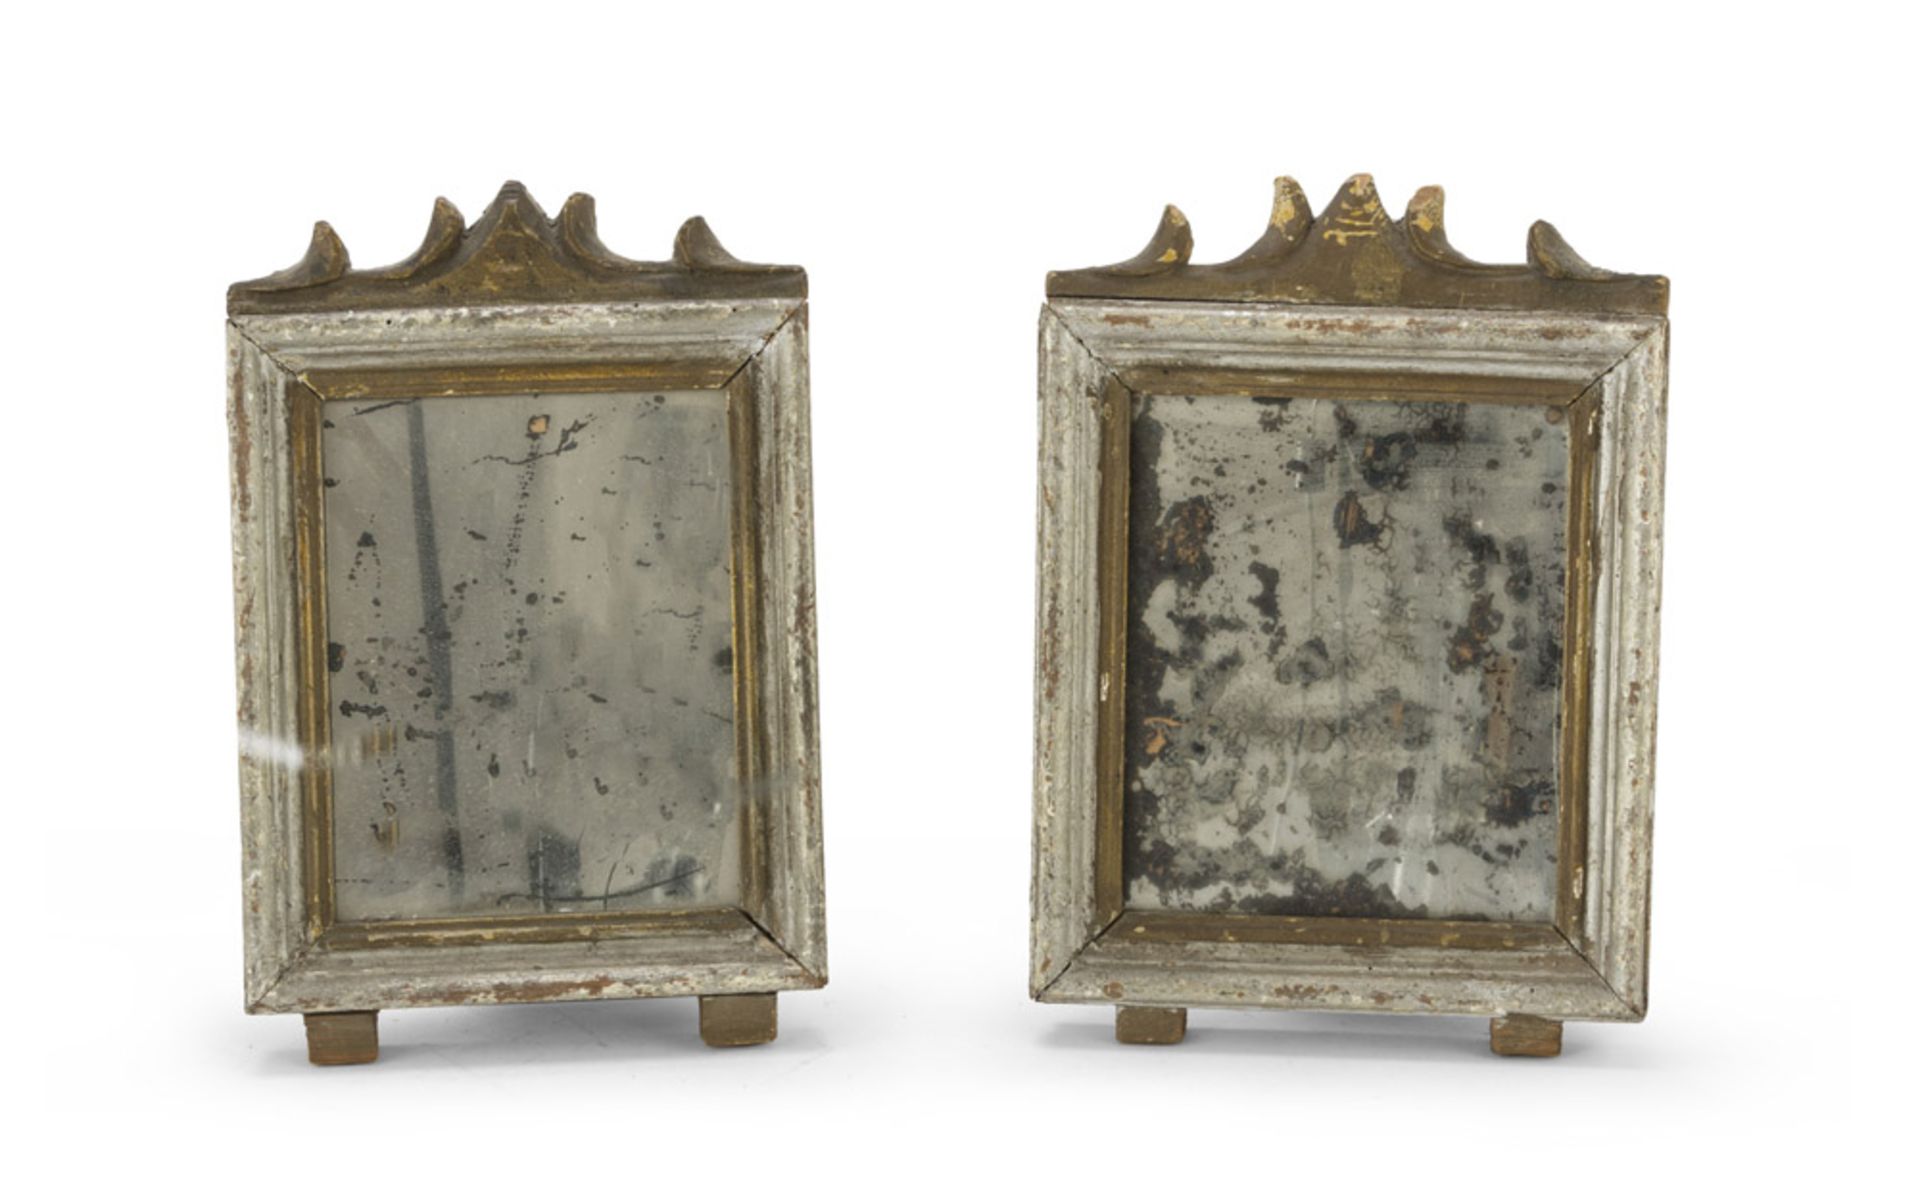 PAIR OF SNALL MIRRORS IN SILVER-PLATED WOOD – LATE 18TH CENTURY